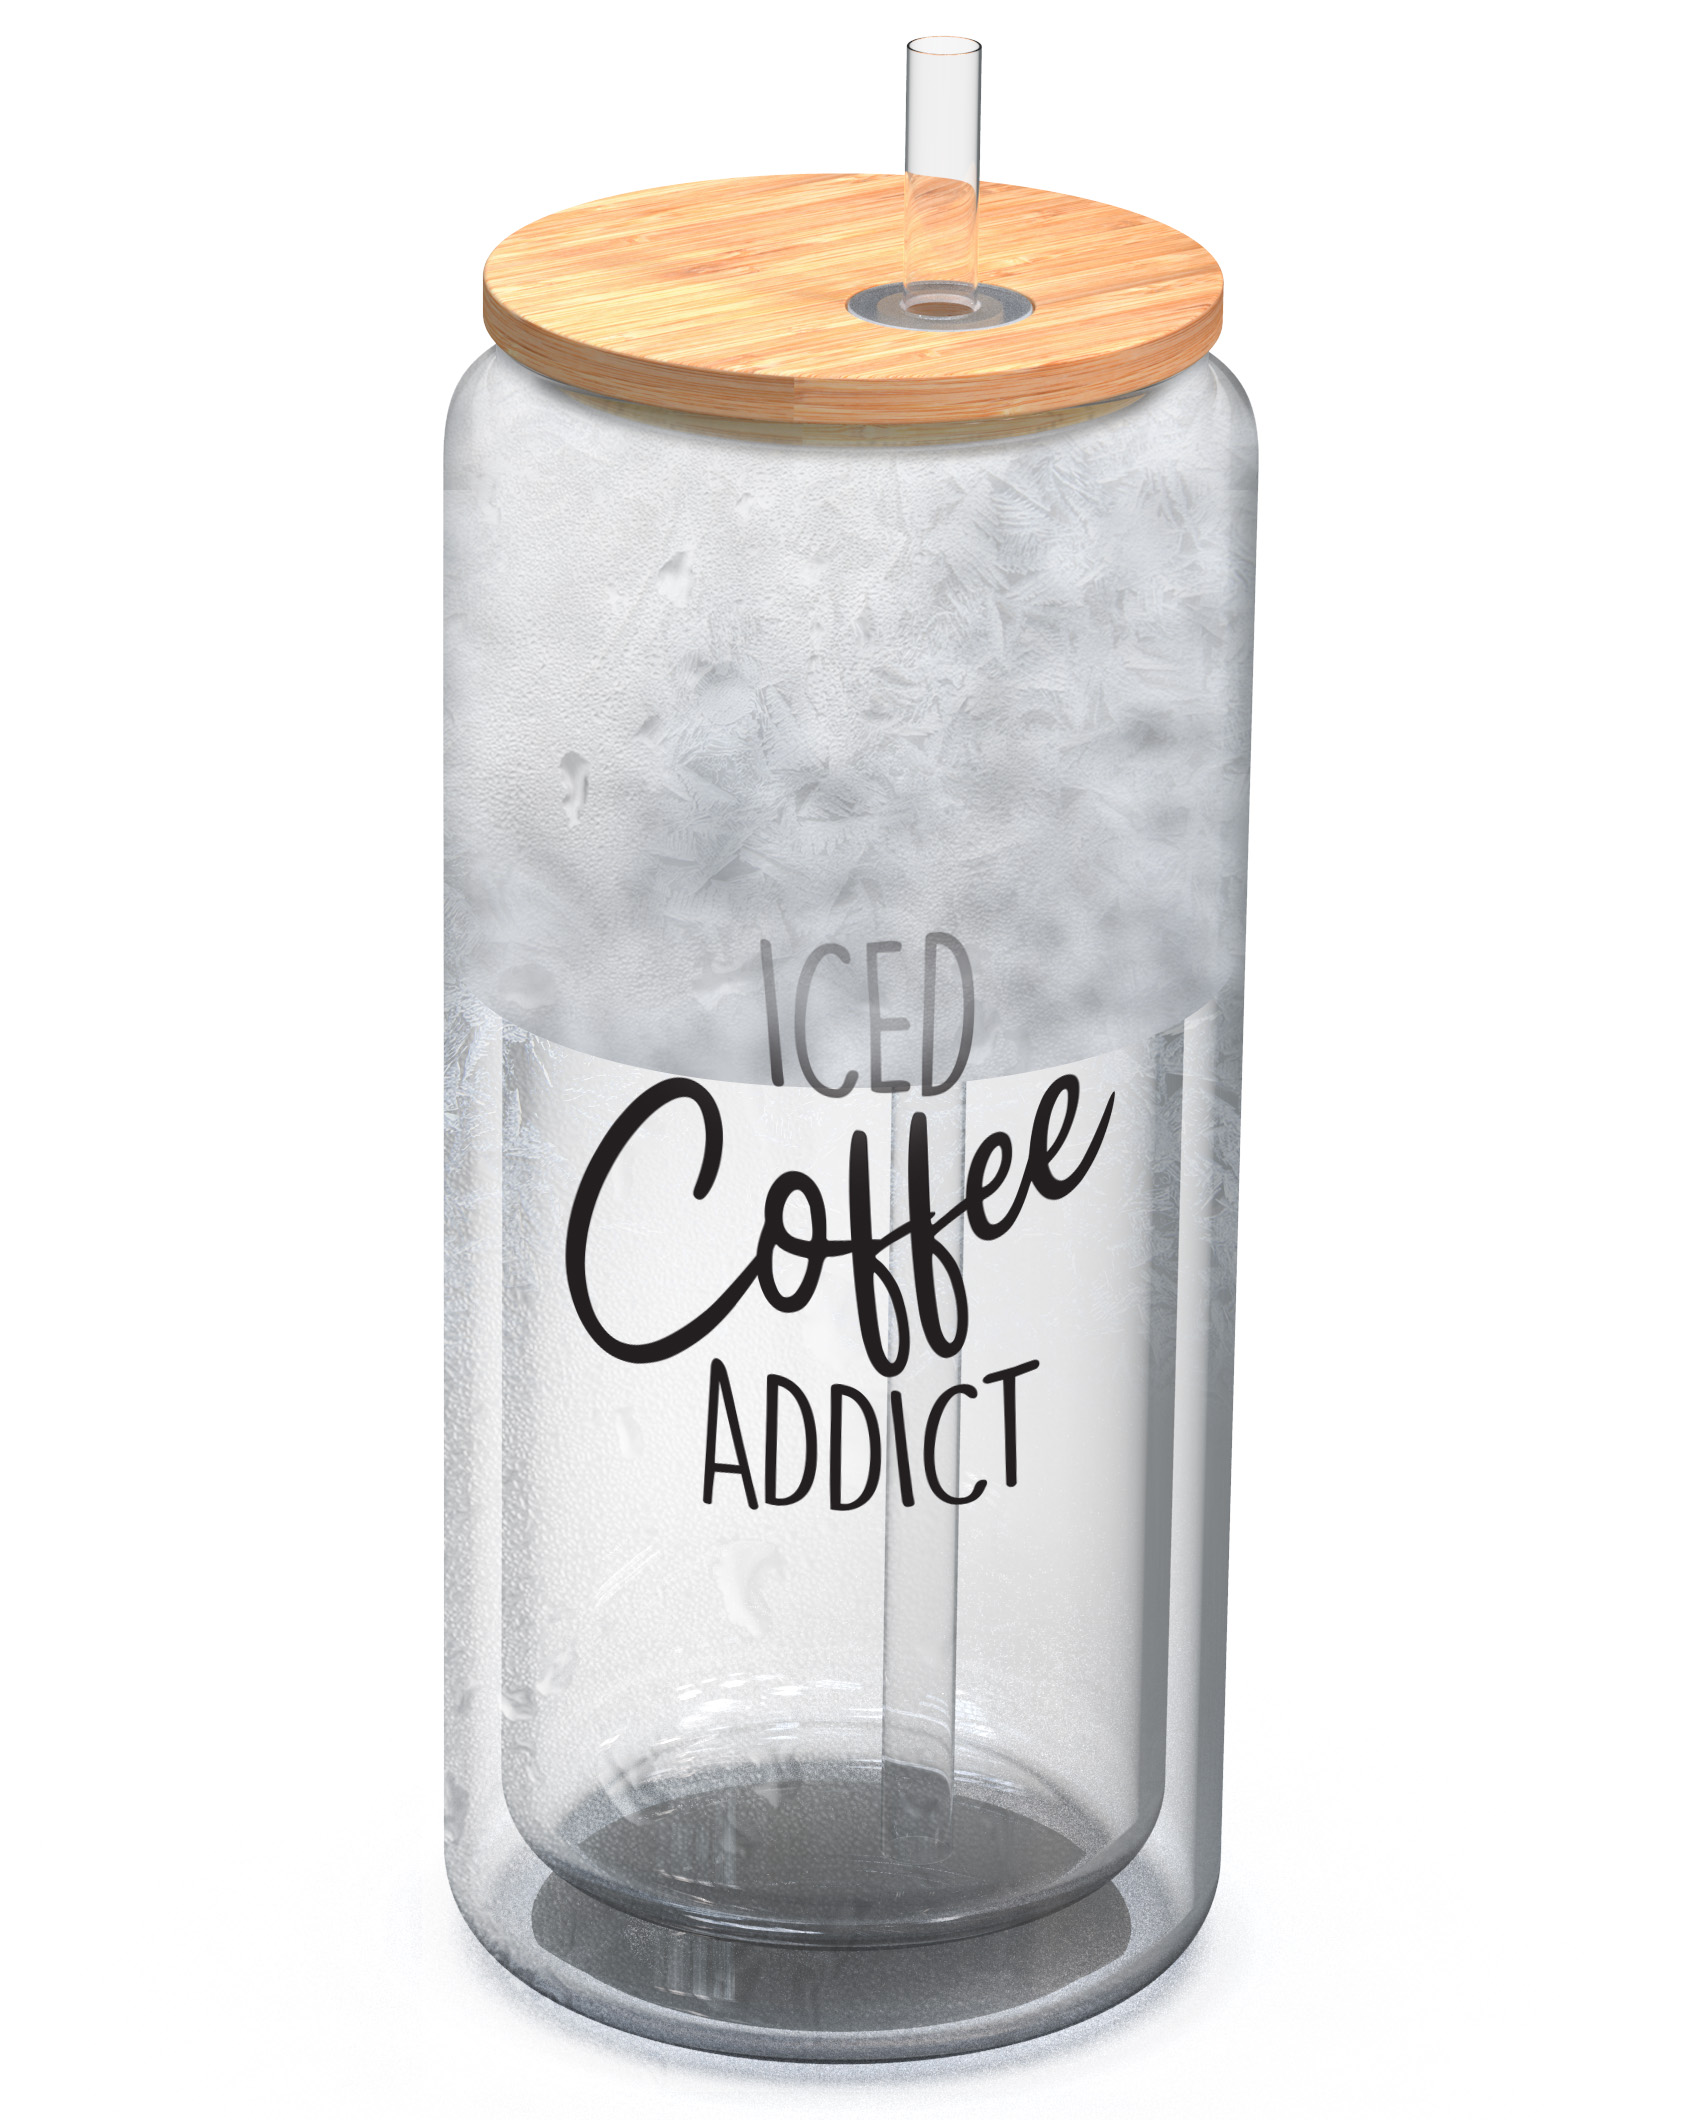 https://encased.b-cdn.net/wp-content/uploads/sites/7/2022/12/SoHo-Iced-Coffee-Cup-with-Lid-and-Straw-ICED-COFFEE-ADDICT-LI3540-4.jpg